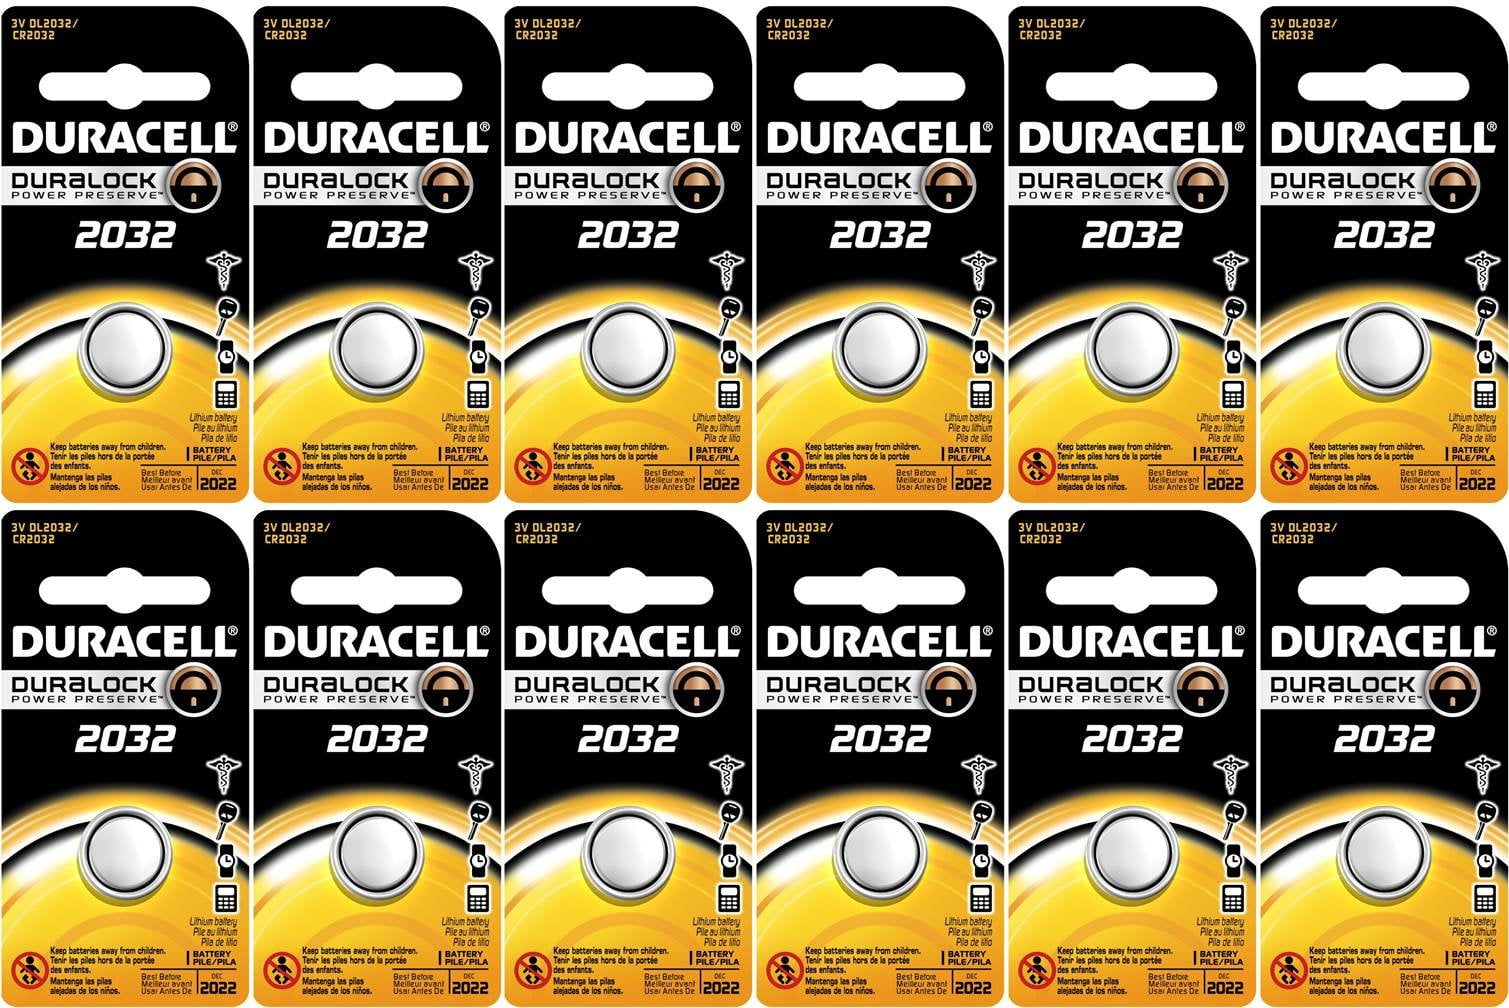 Duracell DL2032 Lithium Coin Battery, 2032 Size, 3V, 230mAh Capacity Pack  of 12 